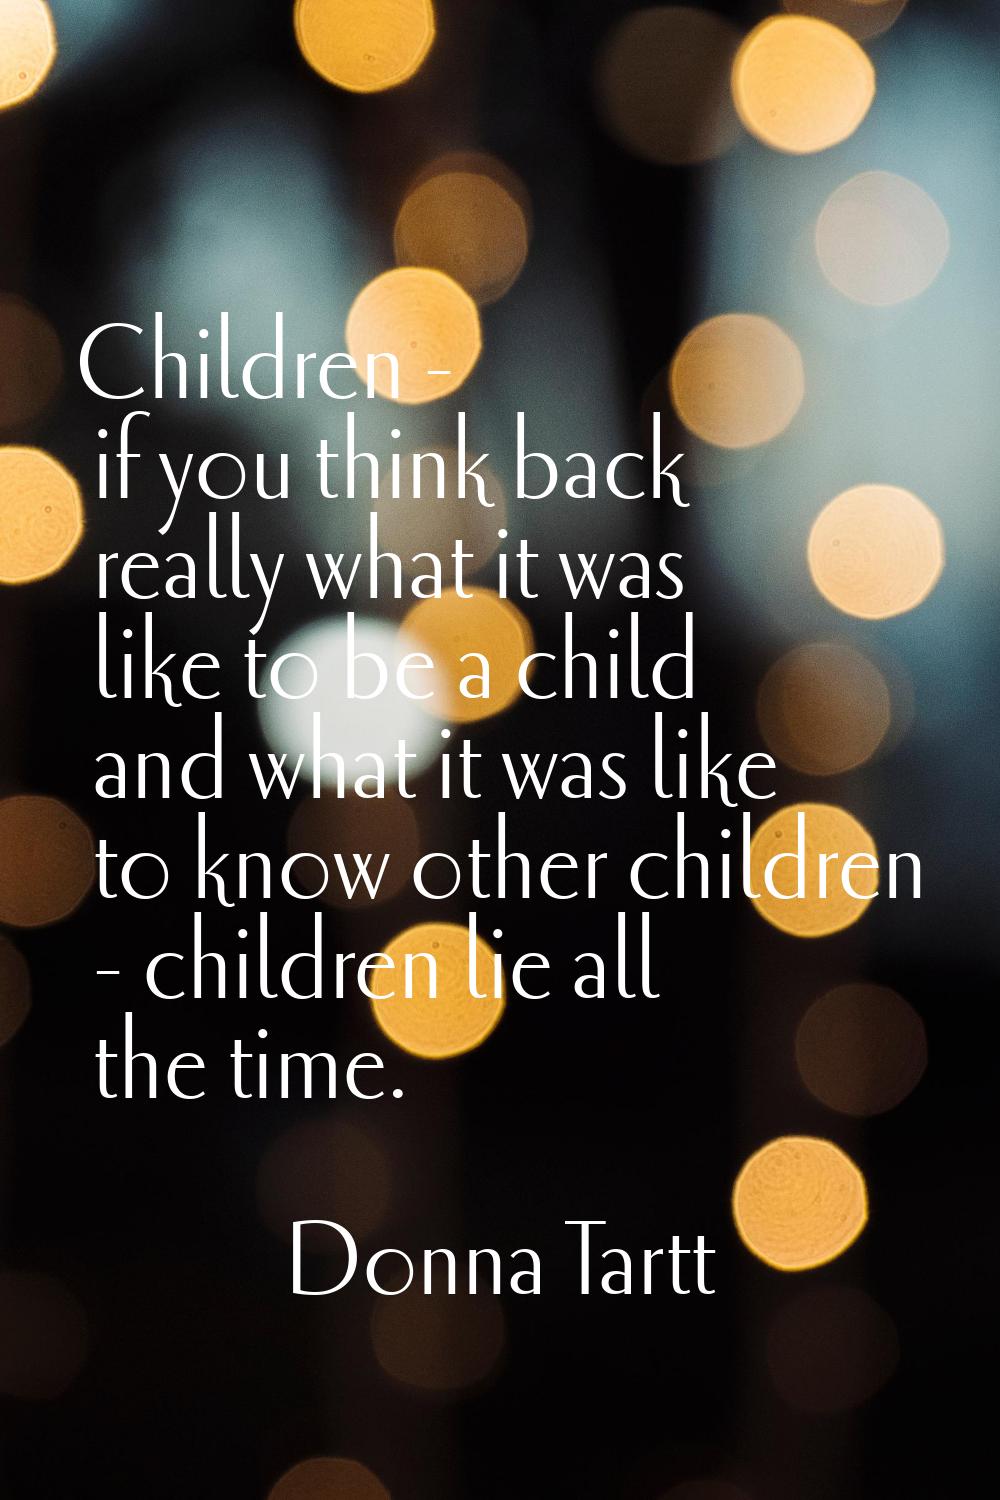 Children - if you think back really what it was like to be a child and what it was like to know oth